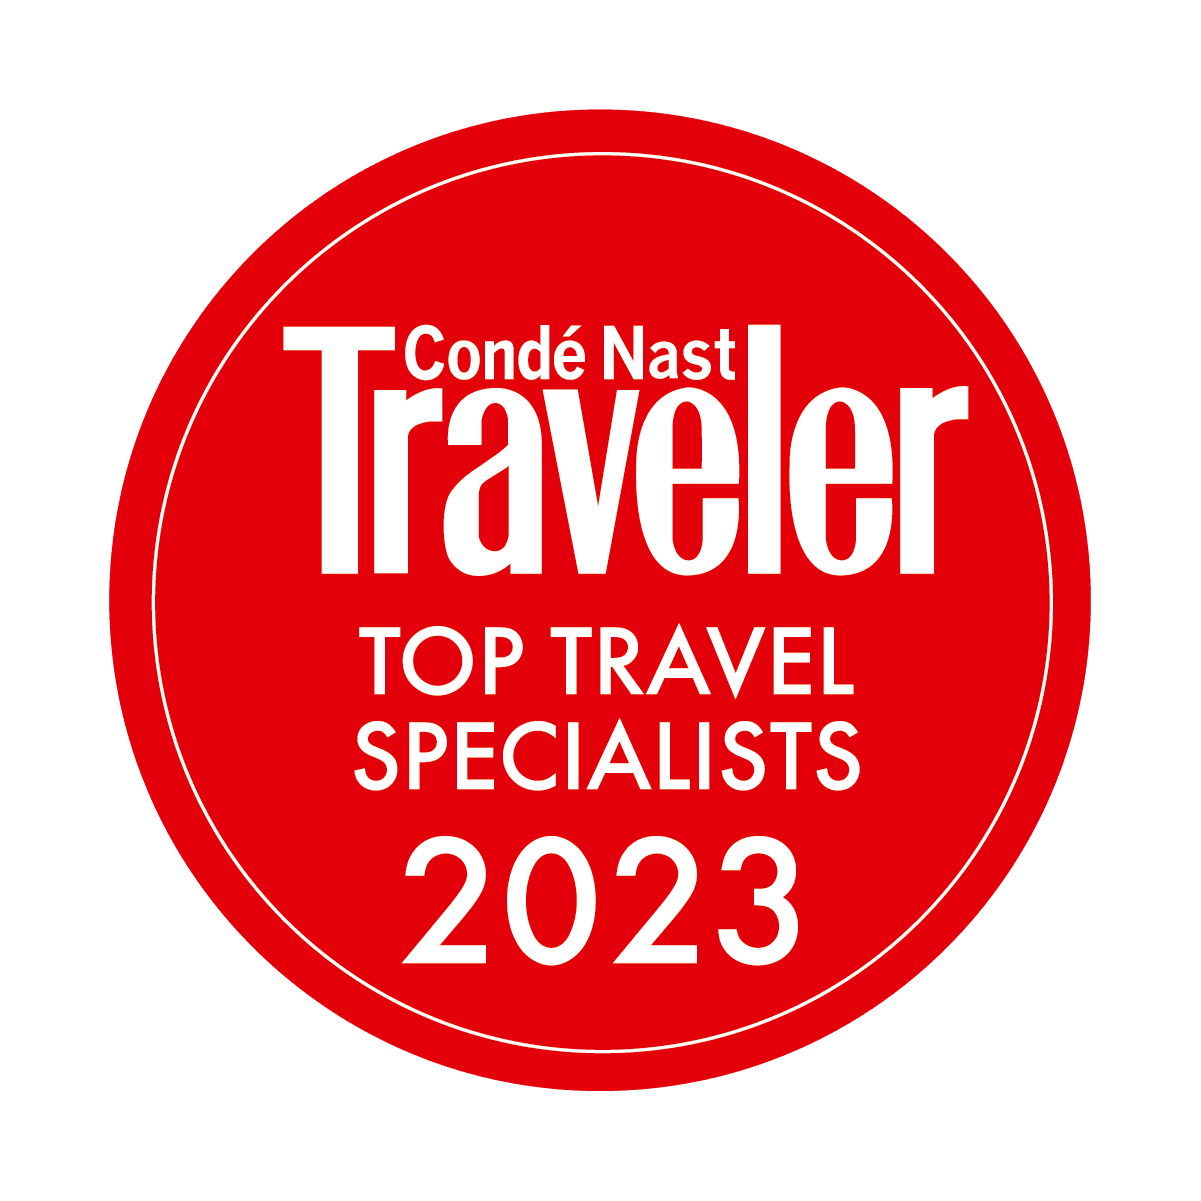 Us travelspecialists 2023 seal